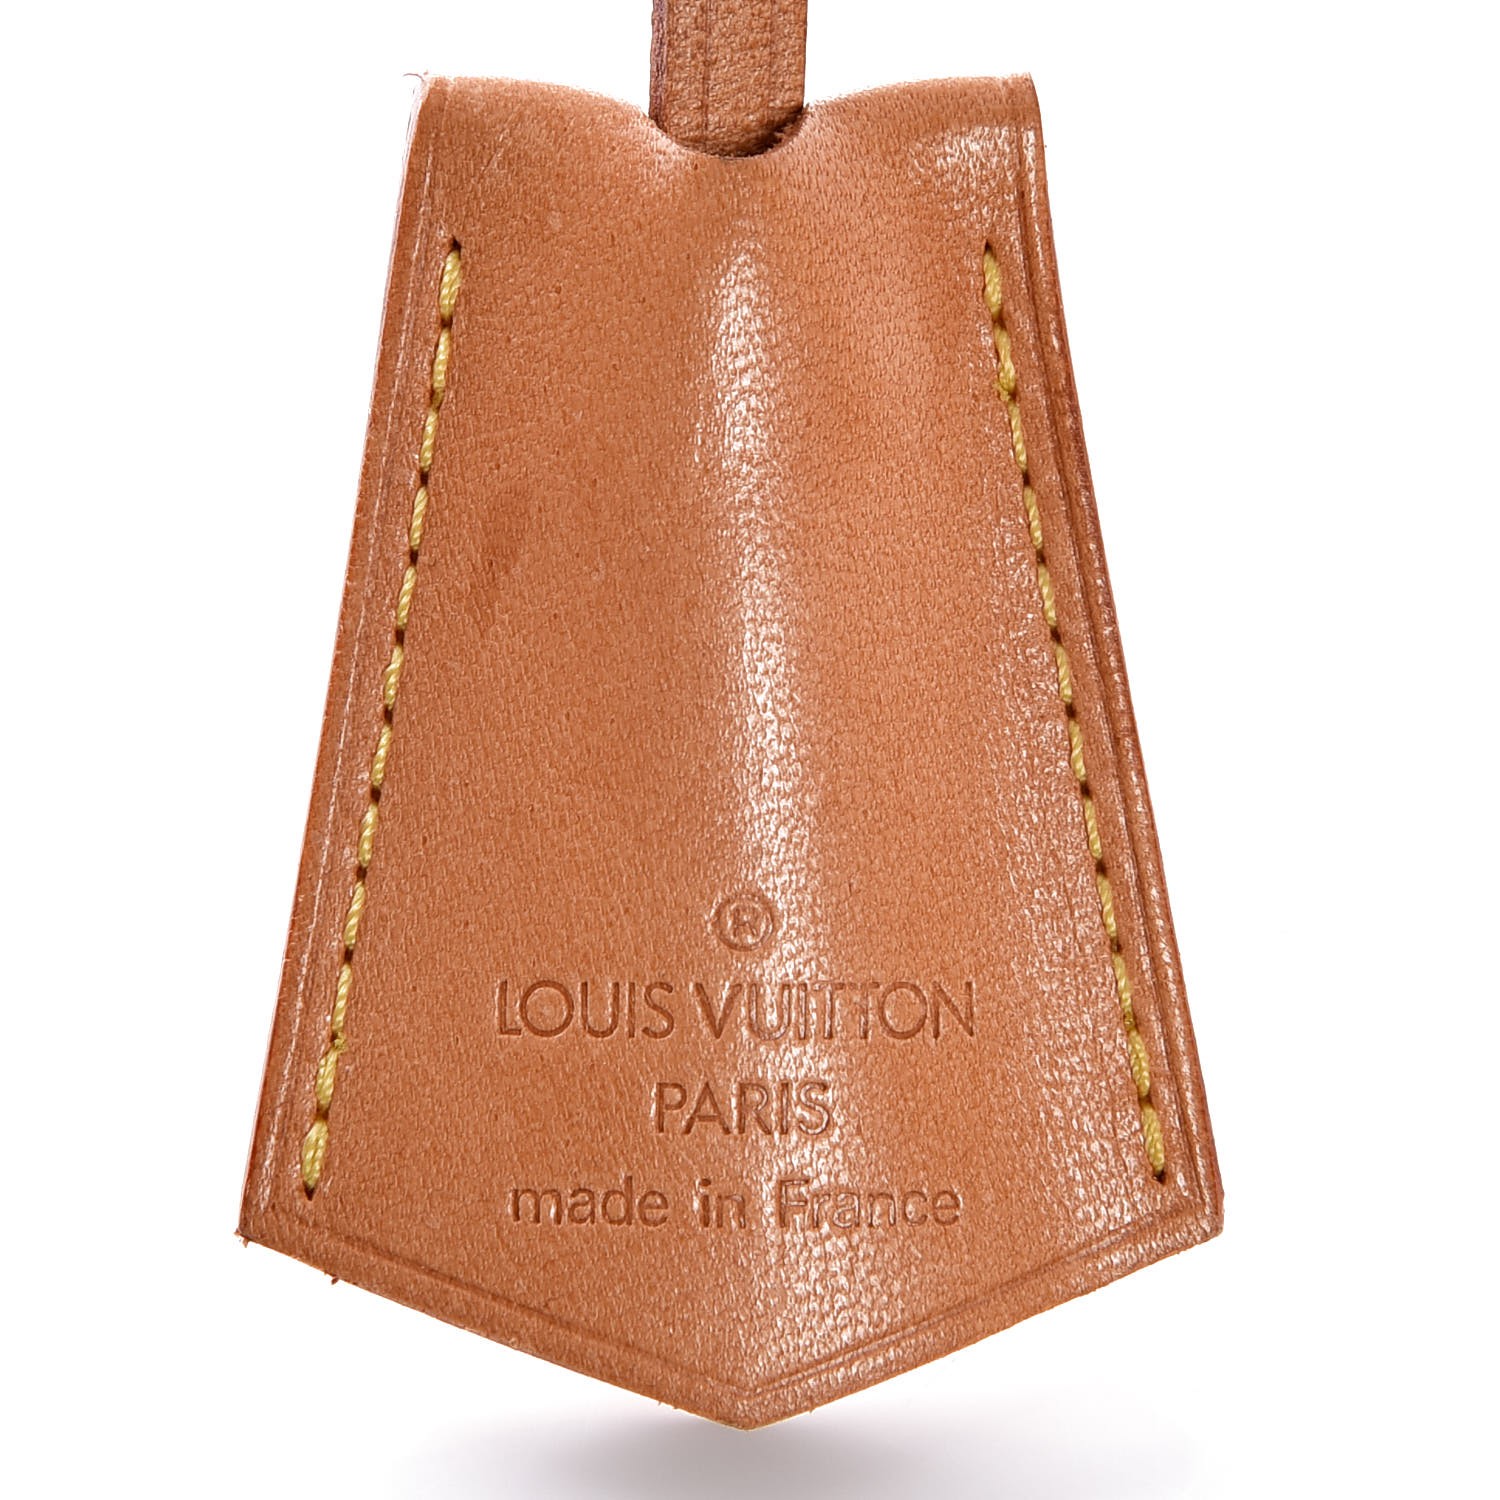 LOUIS VUITTON. Pendant key under bell held on its natura…